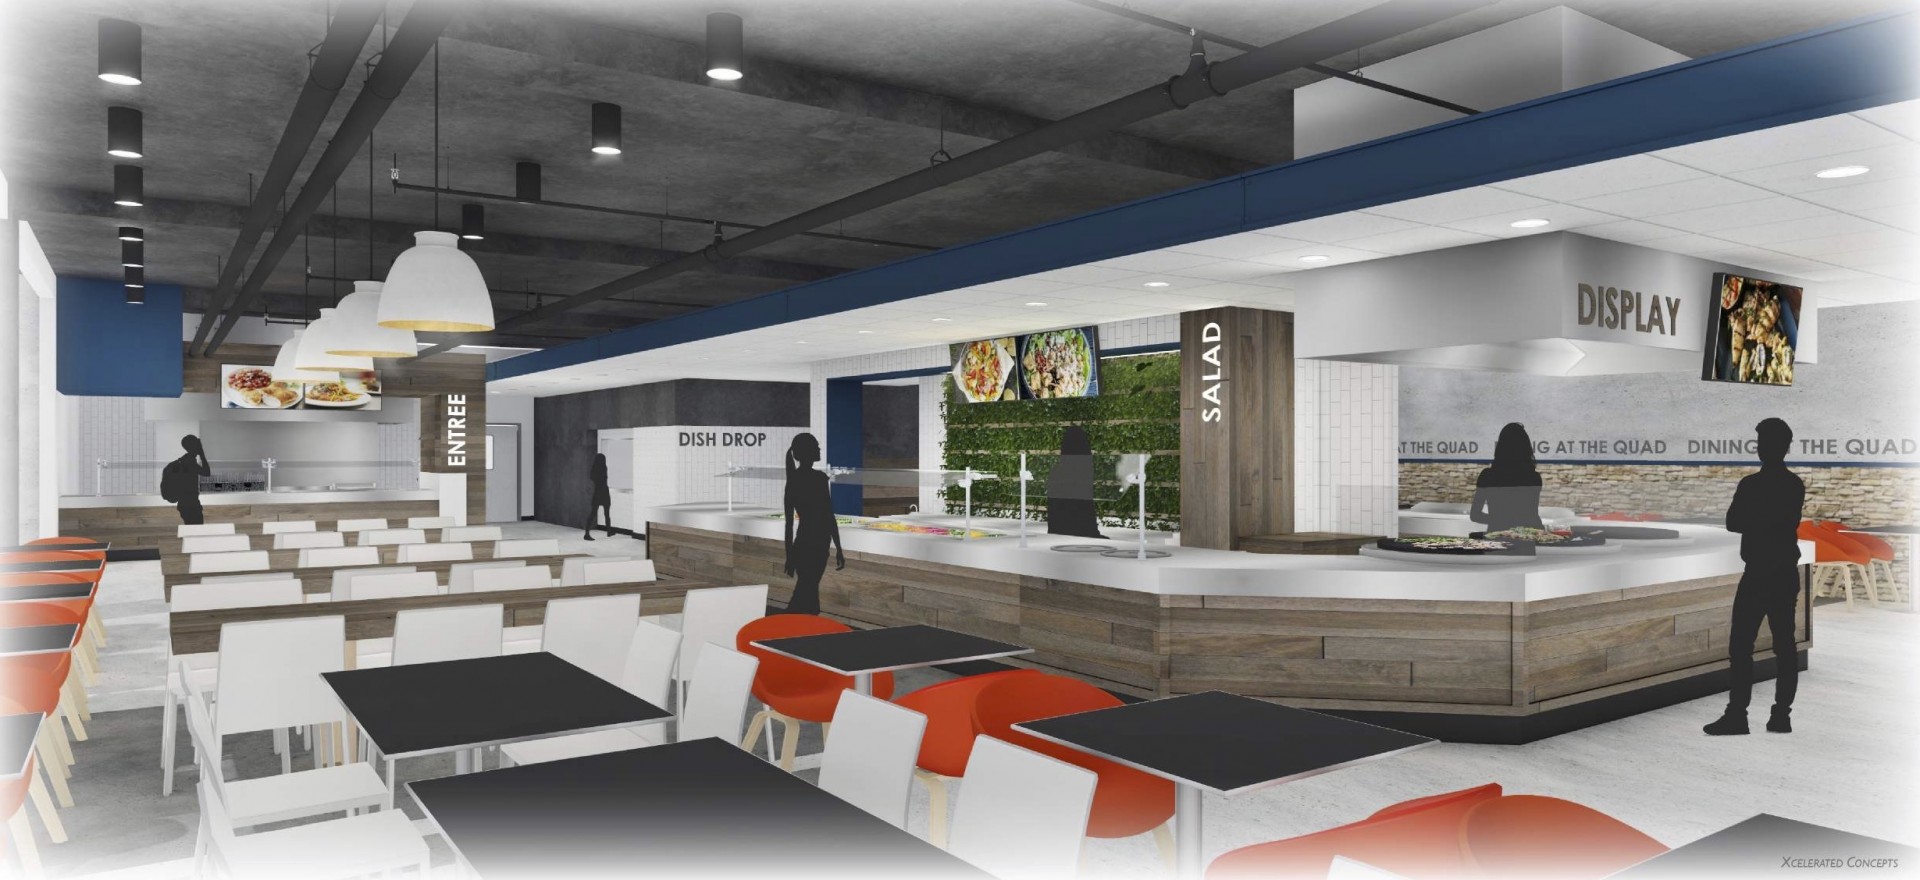 While final design plans are still in the works, an artist’s rendering shows an example of what CSUSM’s dining cafe may look like. (Courtesy of Cal State San Marcos)